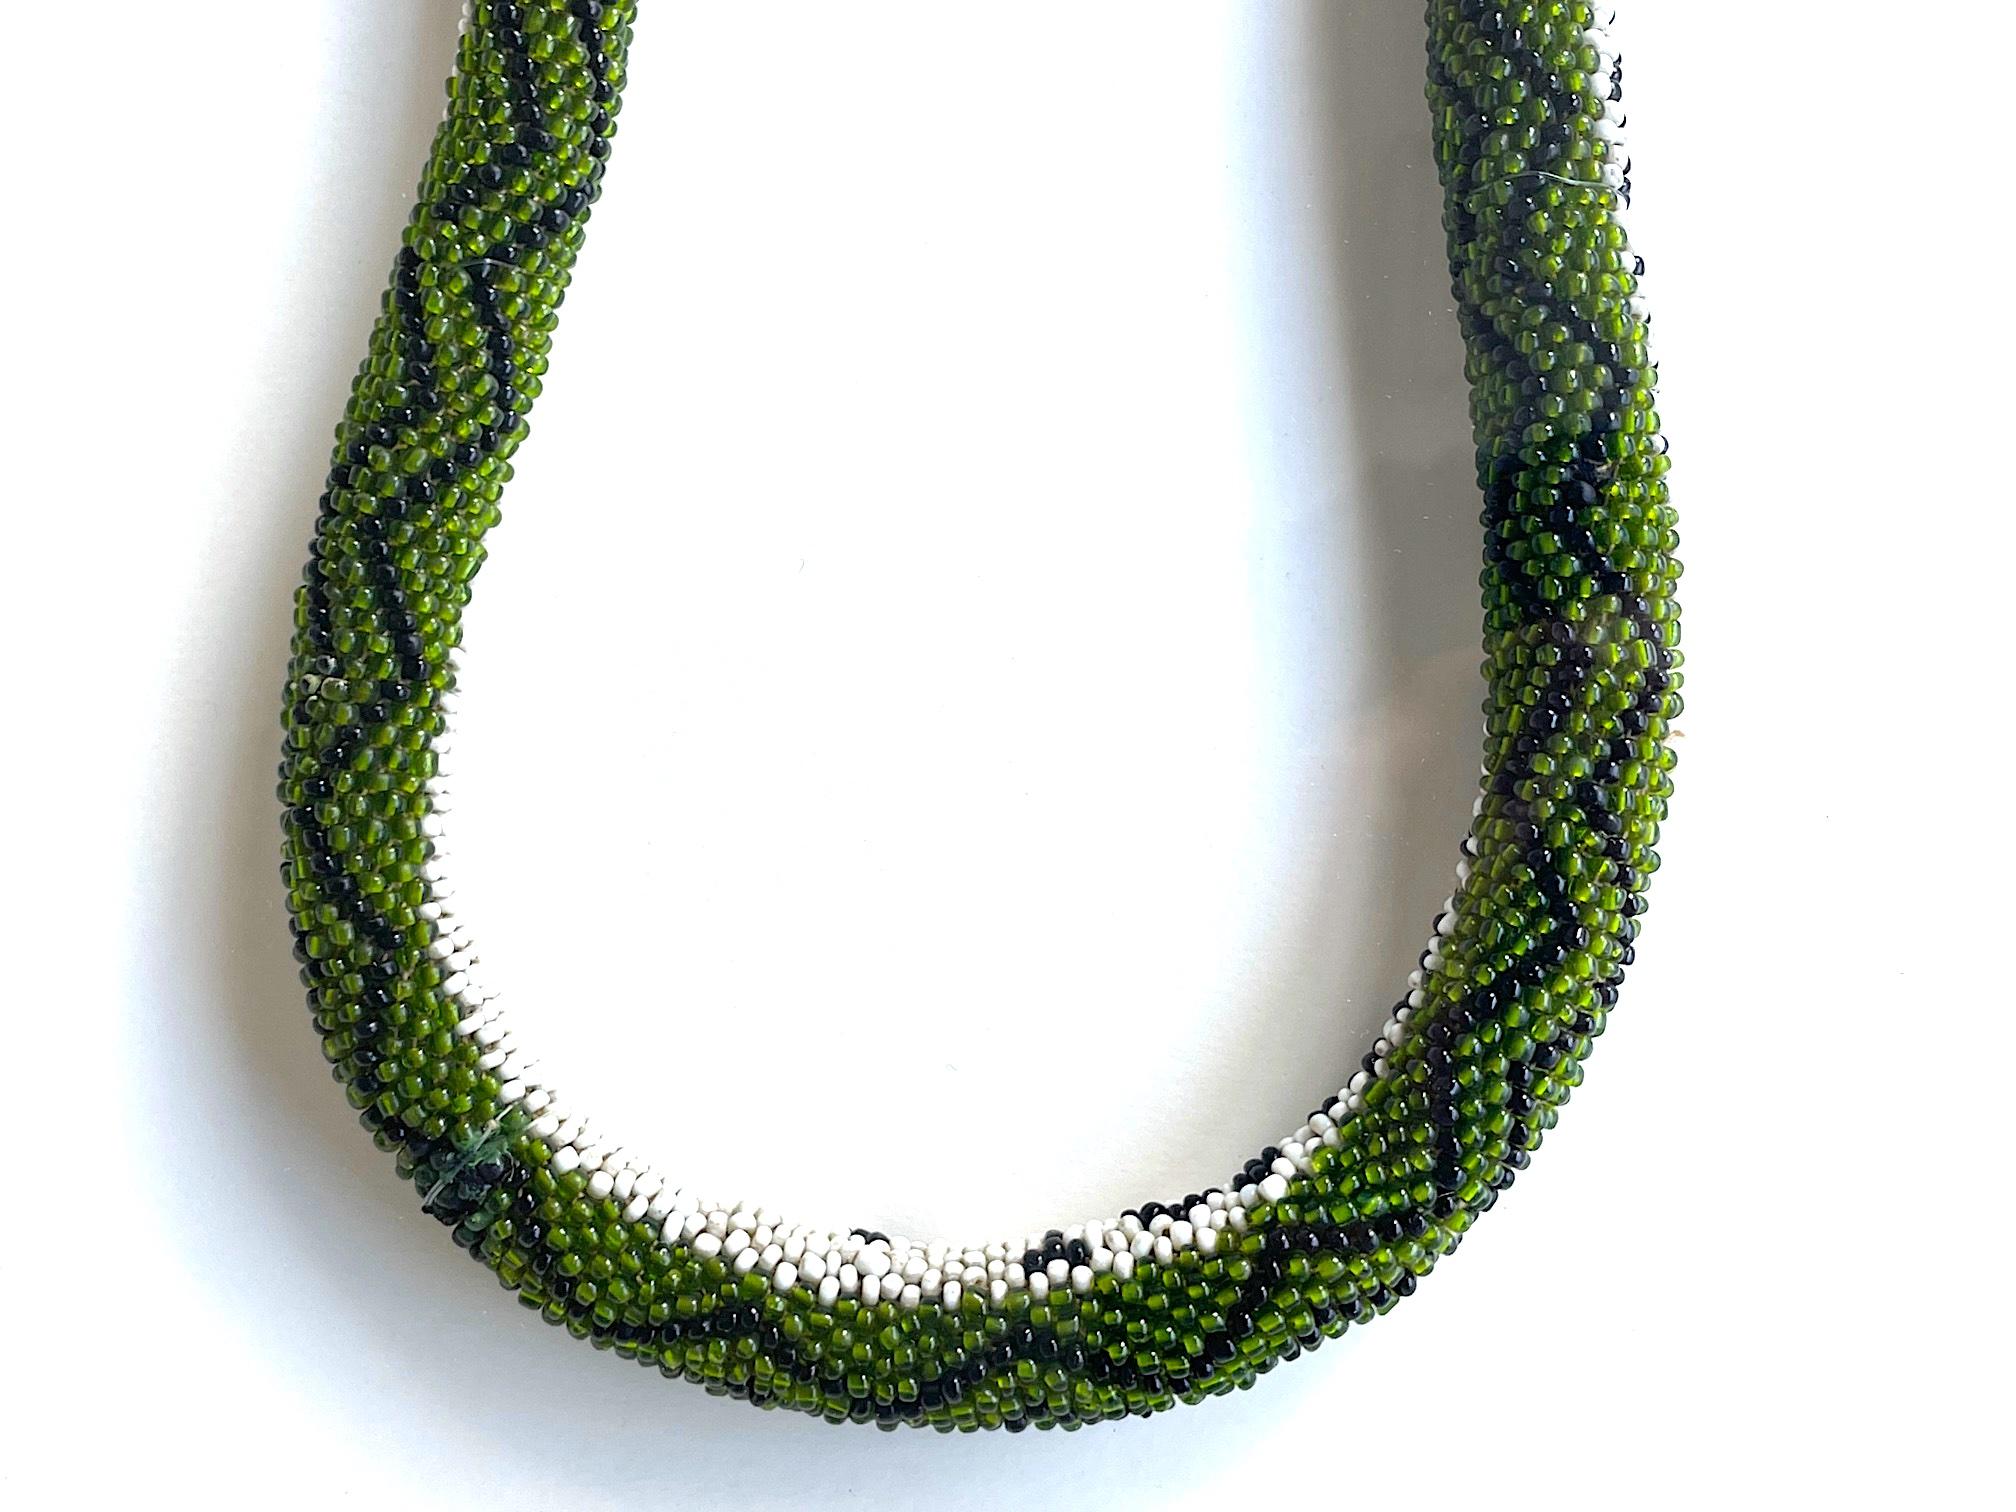 Beads Stunning Large Framed Green Beaded Snake Made by WW1 Turkish Prisoners of War